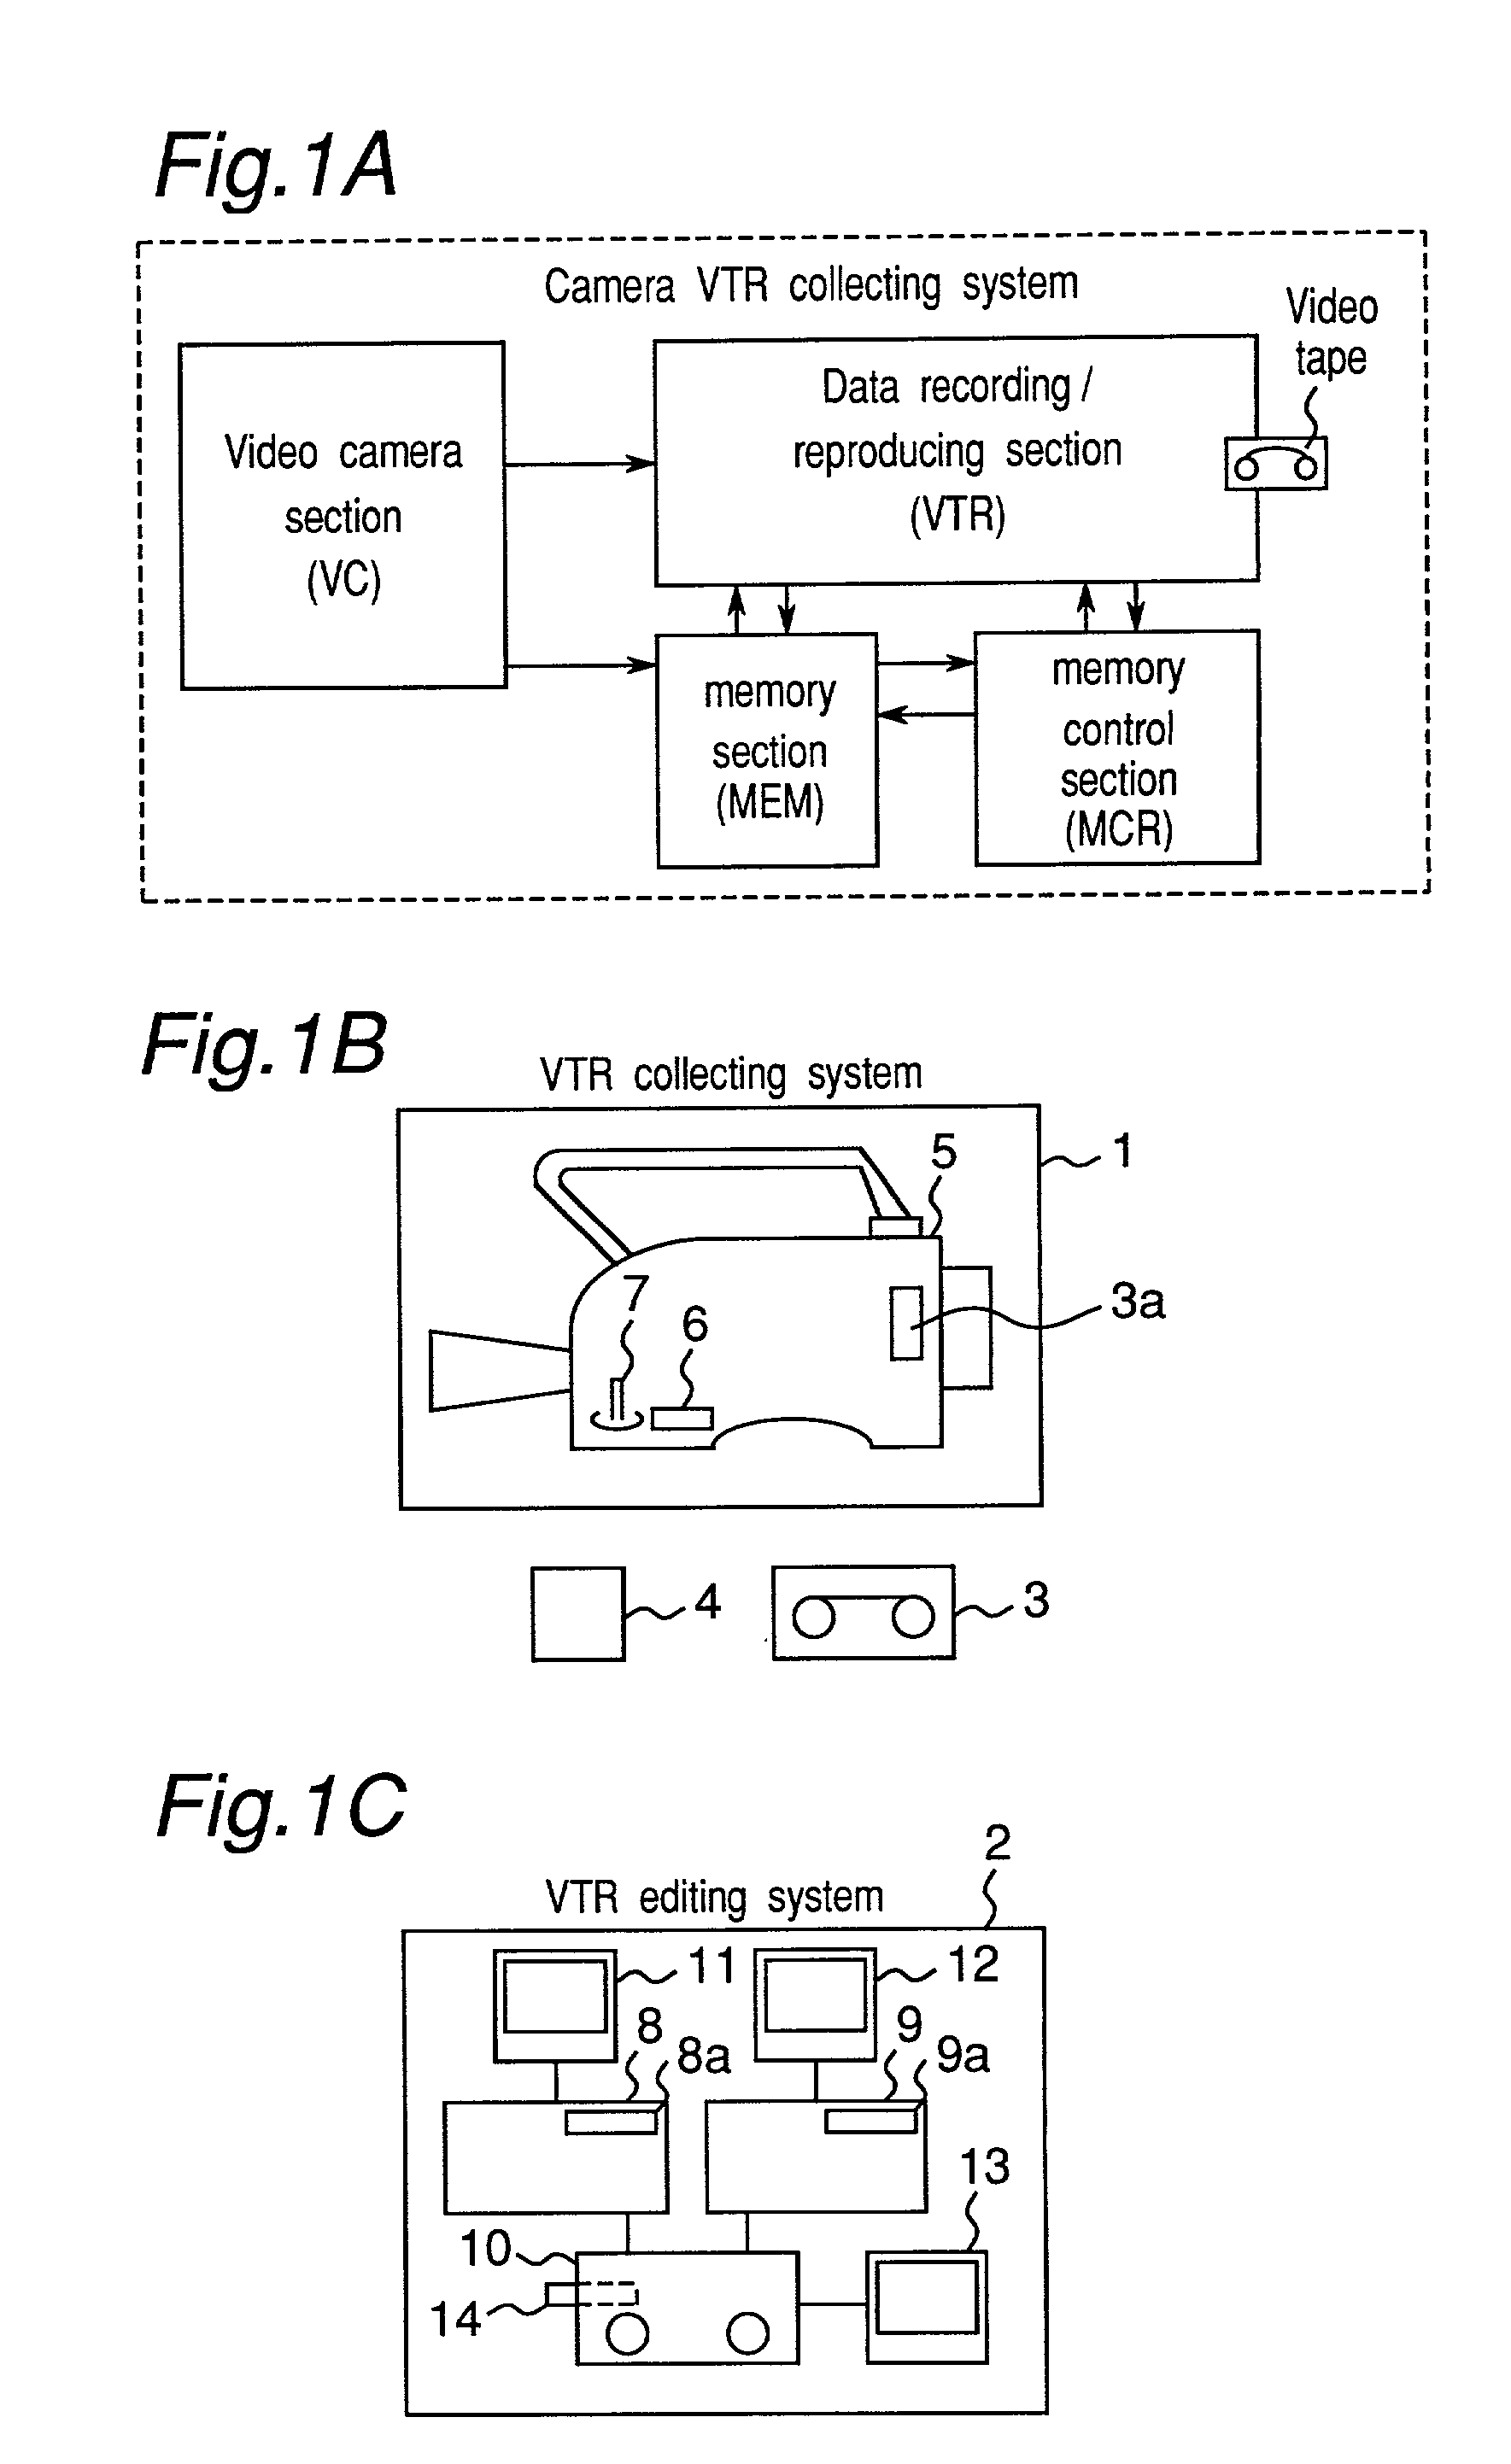 Video/audio information collecting system using video camera and its editing system